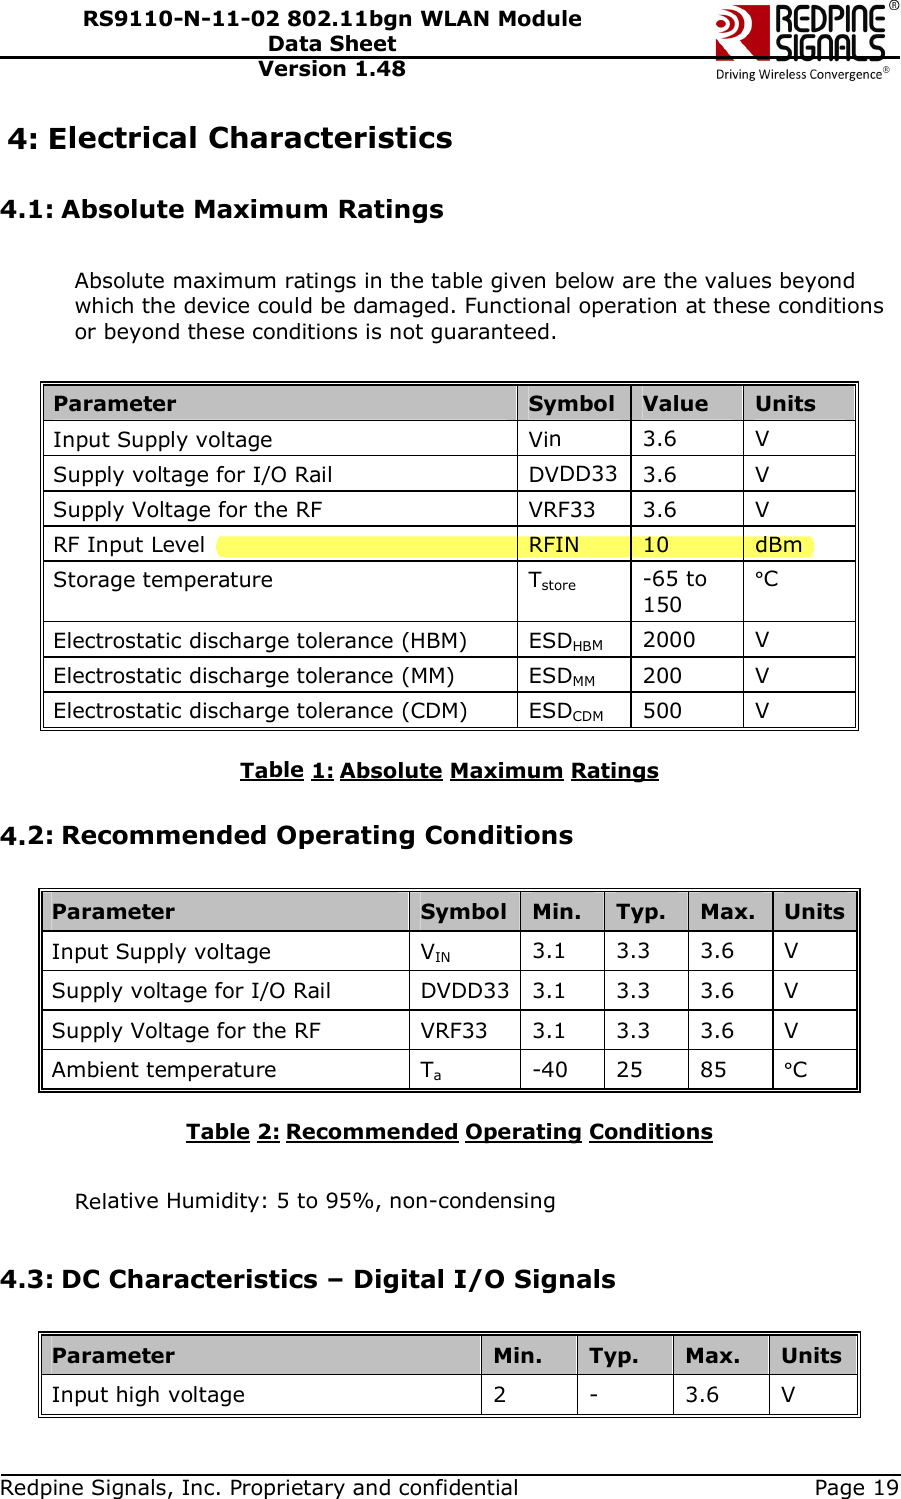   Redpine Signals, Inc. Proprietary and confidential  Page 19 RS9110-N-11-02 802.11bgn WLAN Module Data Sheet Version 1.48 4: Electrical Characteristics  4.1: Absolute Maximum Ratings  Absolute maximum ratings in the table given below are the values beyond which the device could be damaged. Functional operation at these conditions or beyond these conditions is not guaranteed.  Parameter  Symbol  Value  Units Input Supply voltage   Vin  3.6  V Supply voltage for I/O Rail  DVDD33 3.6  V Supply Voltage for the RF  VRF33  3.6  V RF Input Level   RFIN  10  dBm Storage temperature  Tstore  -65 to 150 °C Electrostatic discharge tolerance (HBM)  ESDHBM  2000  V Electrostatic discharge tolerance (MM)  ESDMM 200  V Electrostatic discharge tolerance (CDM)  ESDCDM  500  V  Table 1: Absolute Maximum Ratings  4.2: Recommended Operating Conditions  Parameter  Symbol Min.  Typ.  Max.  Units Input Supply voltage  VIN 3.1  3.3  3.6  V Supply voltage for I/O Rail  DVDD33 3.1  3.3  3.6  V Supply Voltage for the RF  VRF33  3.1  3.3  3.6  V Ambient temperature  Ta  -40   25  85  °C  Table 2: Recommended Operating Conditions  Relative Humidity: 5 to 95%, non-condensing  4.3: DC Characteristics – Digital I/O Signals  Parameter  Min.  Typ.  Max.  Units Input high voltage  2  -  3.6  V 